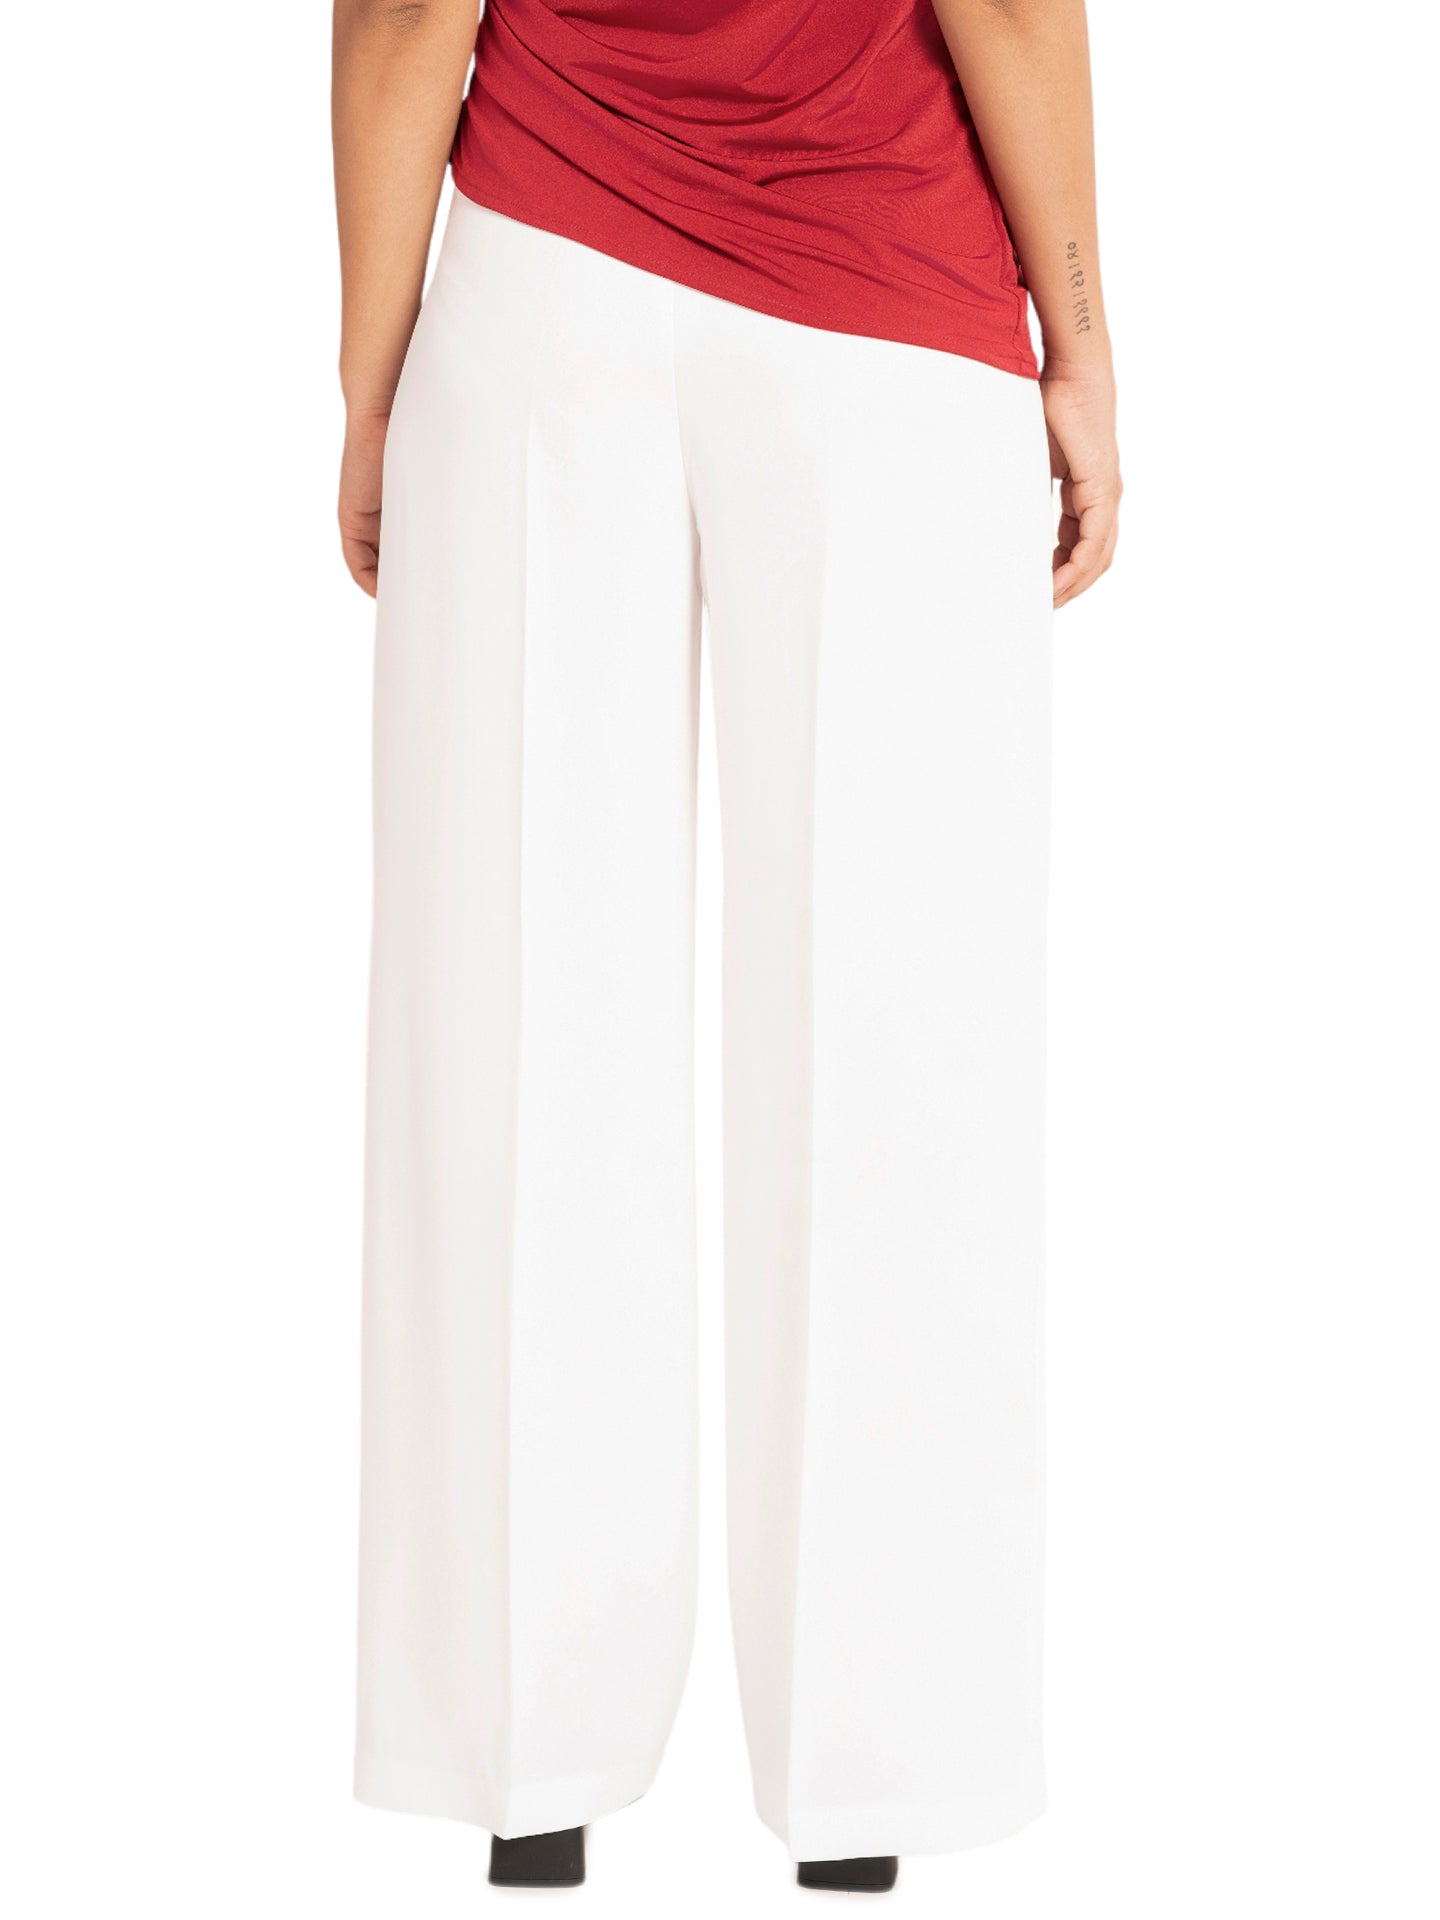 White DAily Trousers